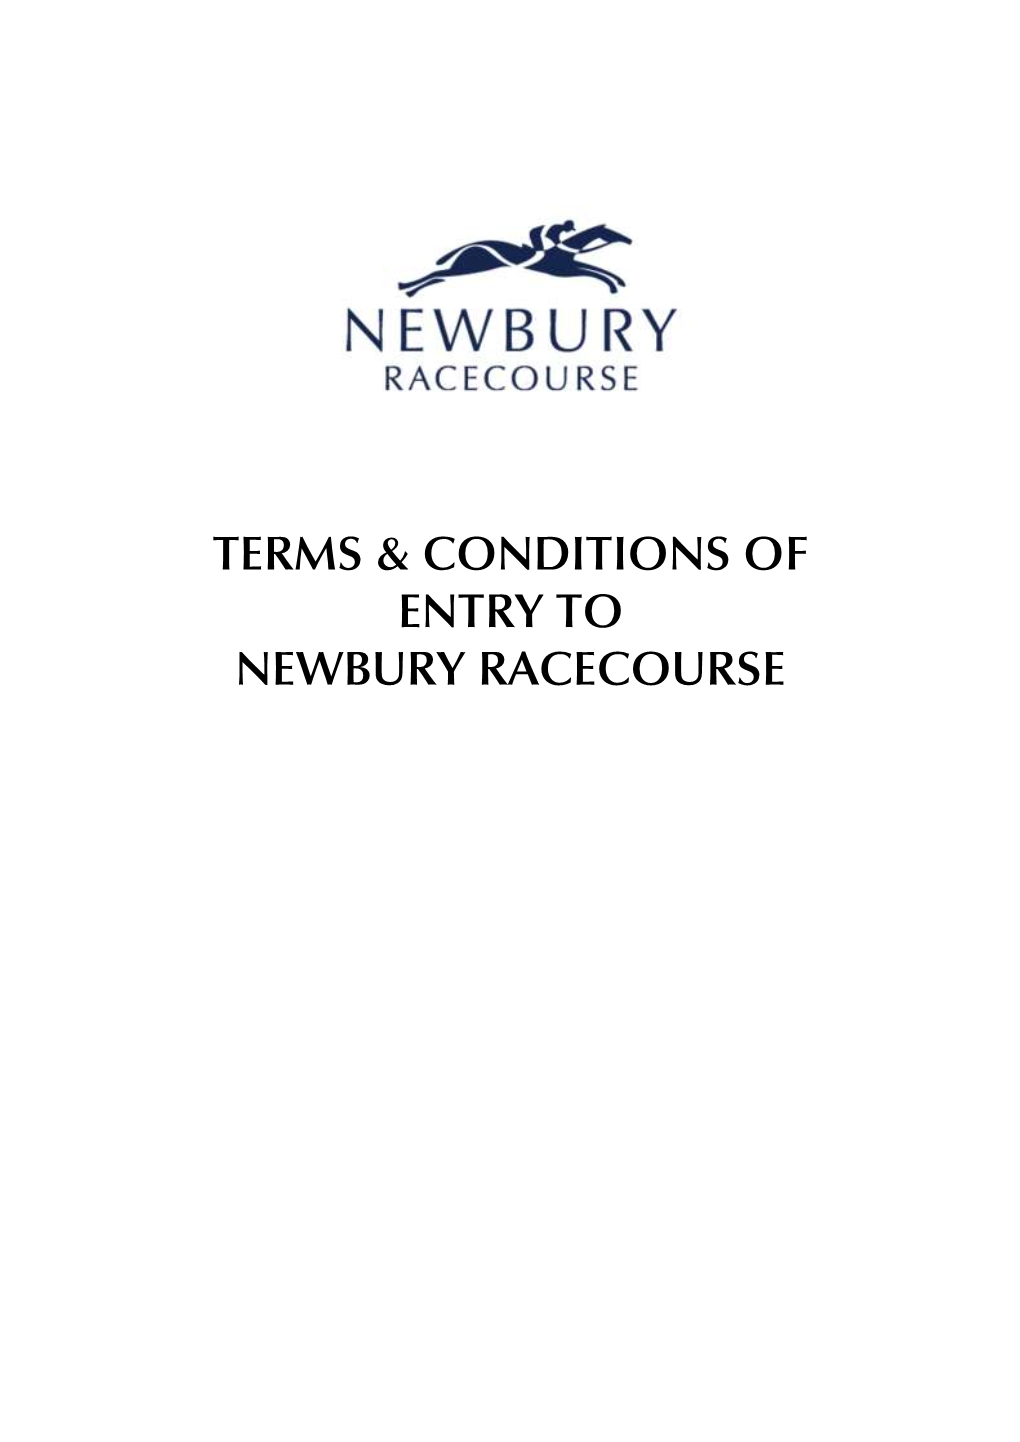 TERMS & CONDITIONS of ENTRY to Newbury Racecourse